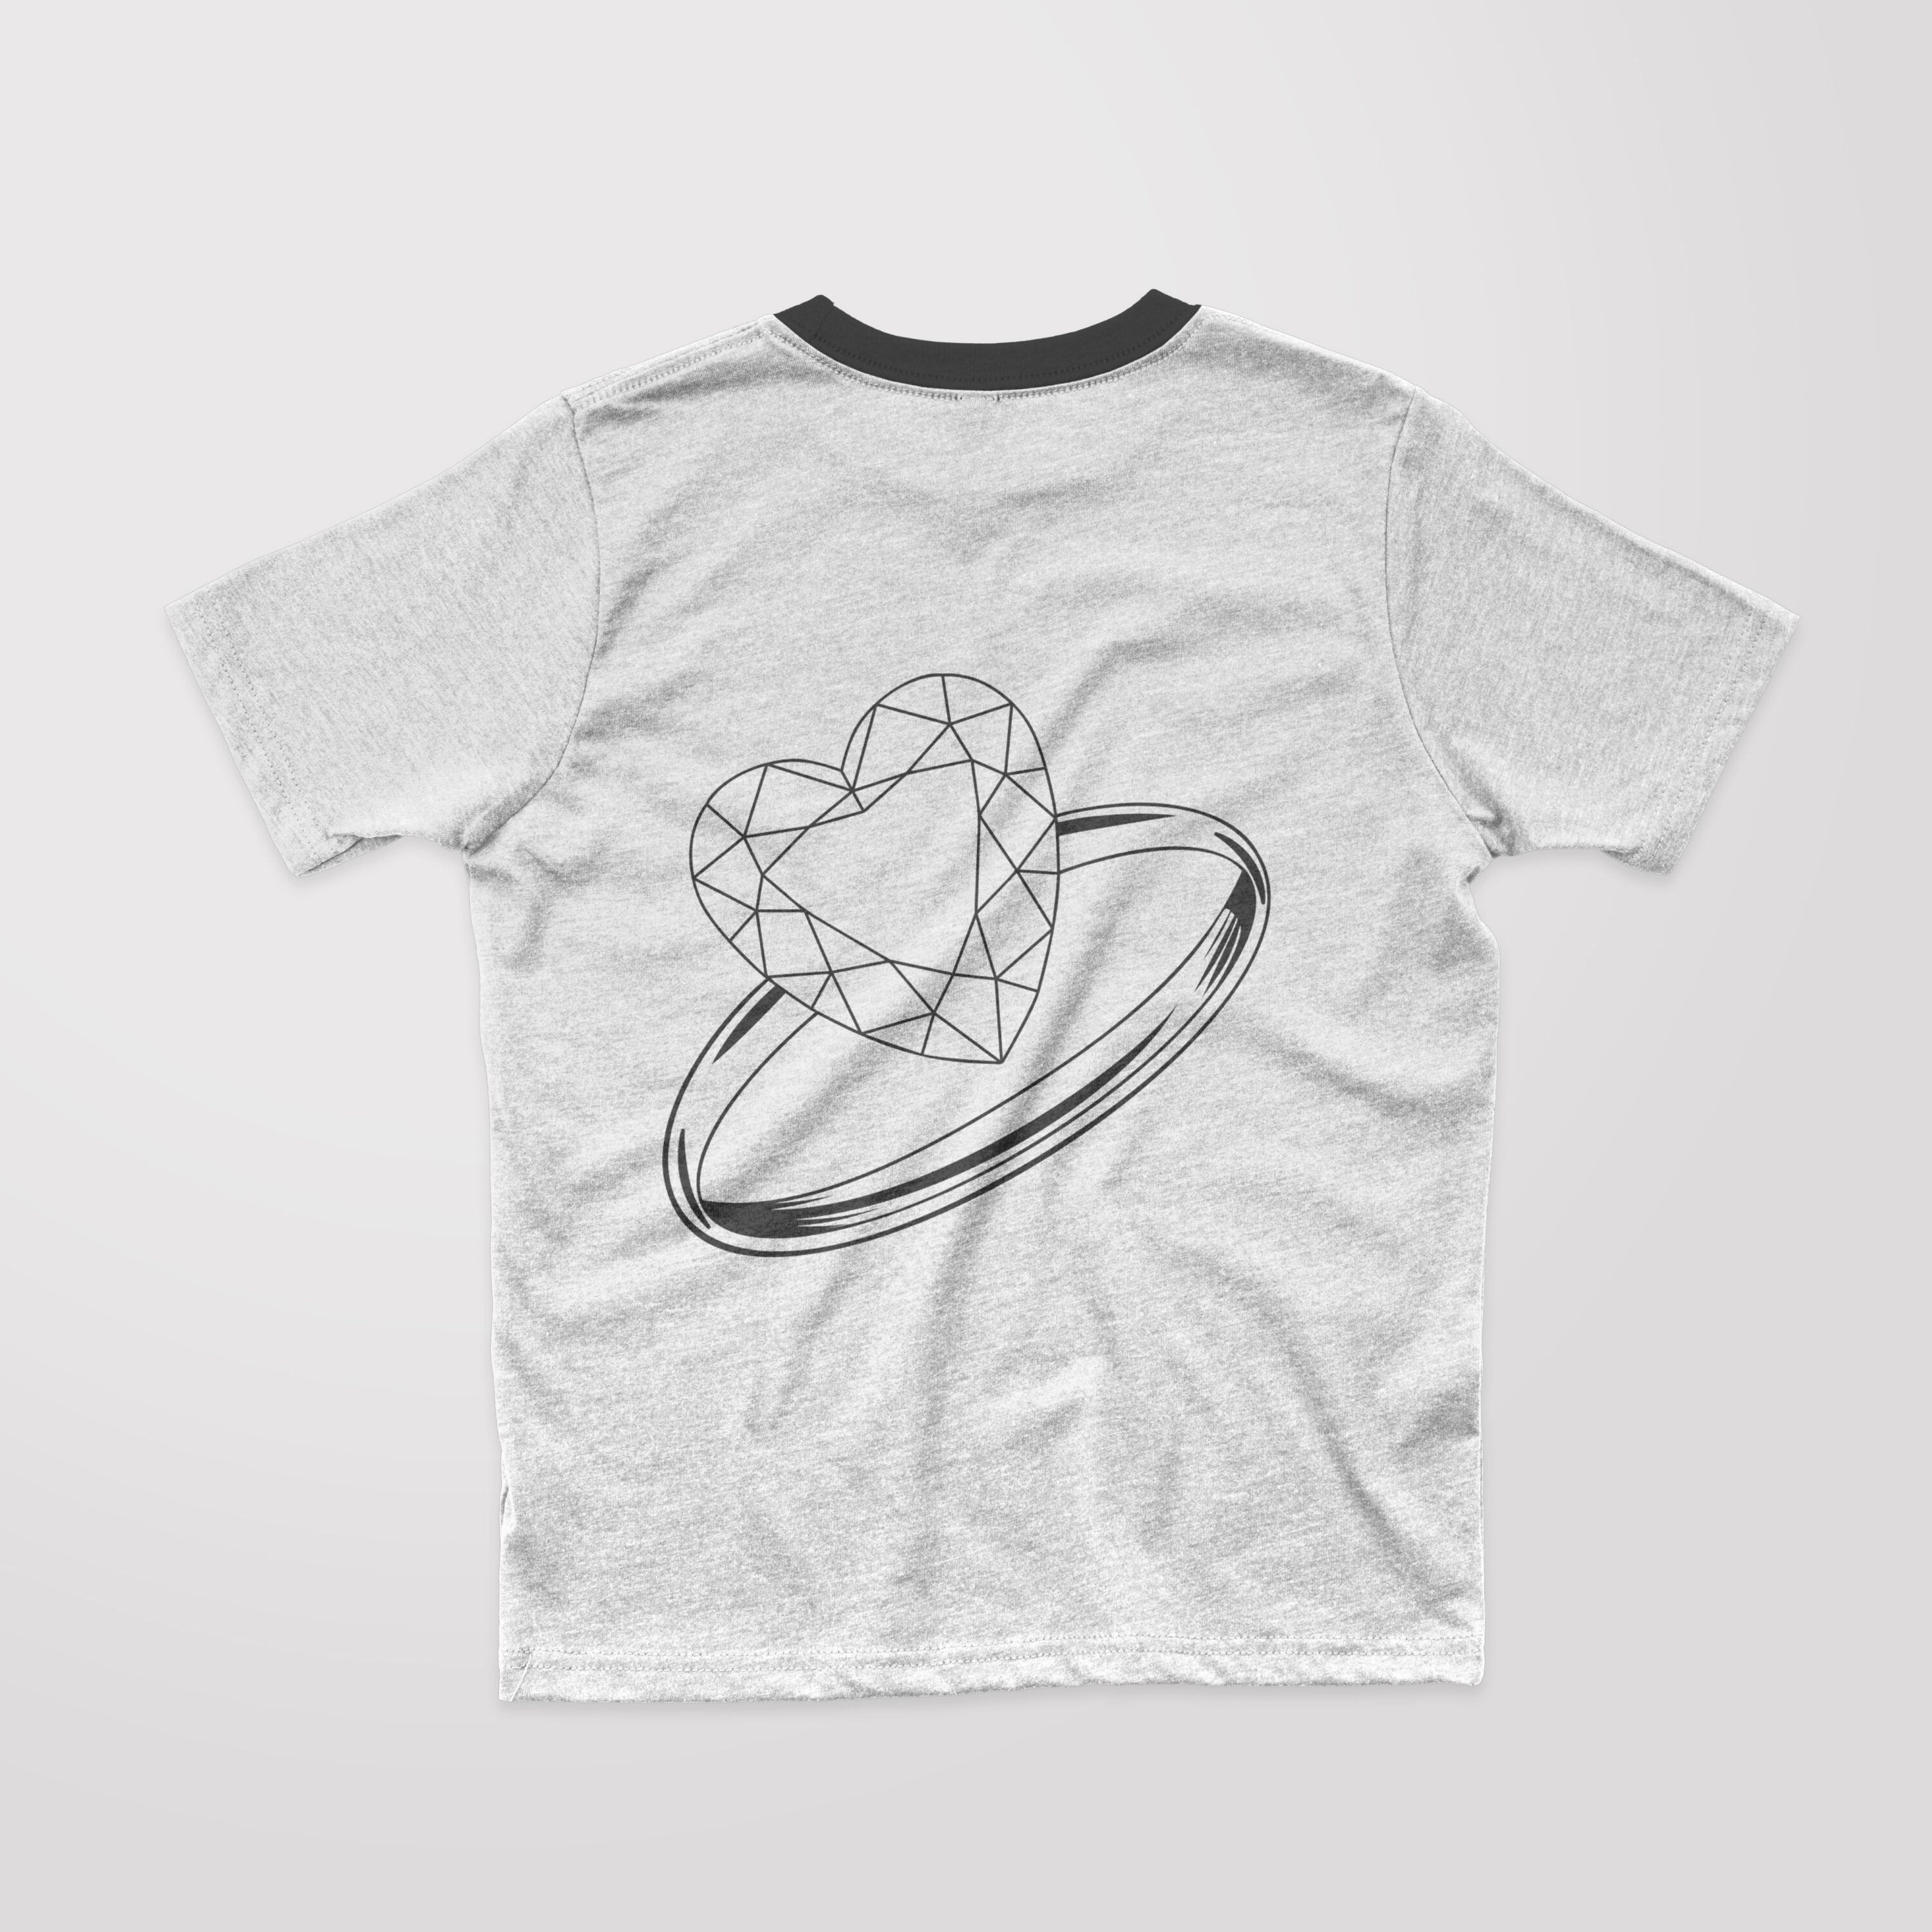 Image of a t-shirt with a charming outline diamond ring print.